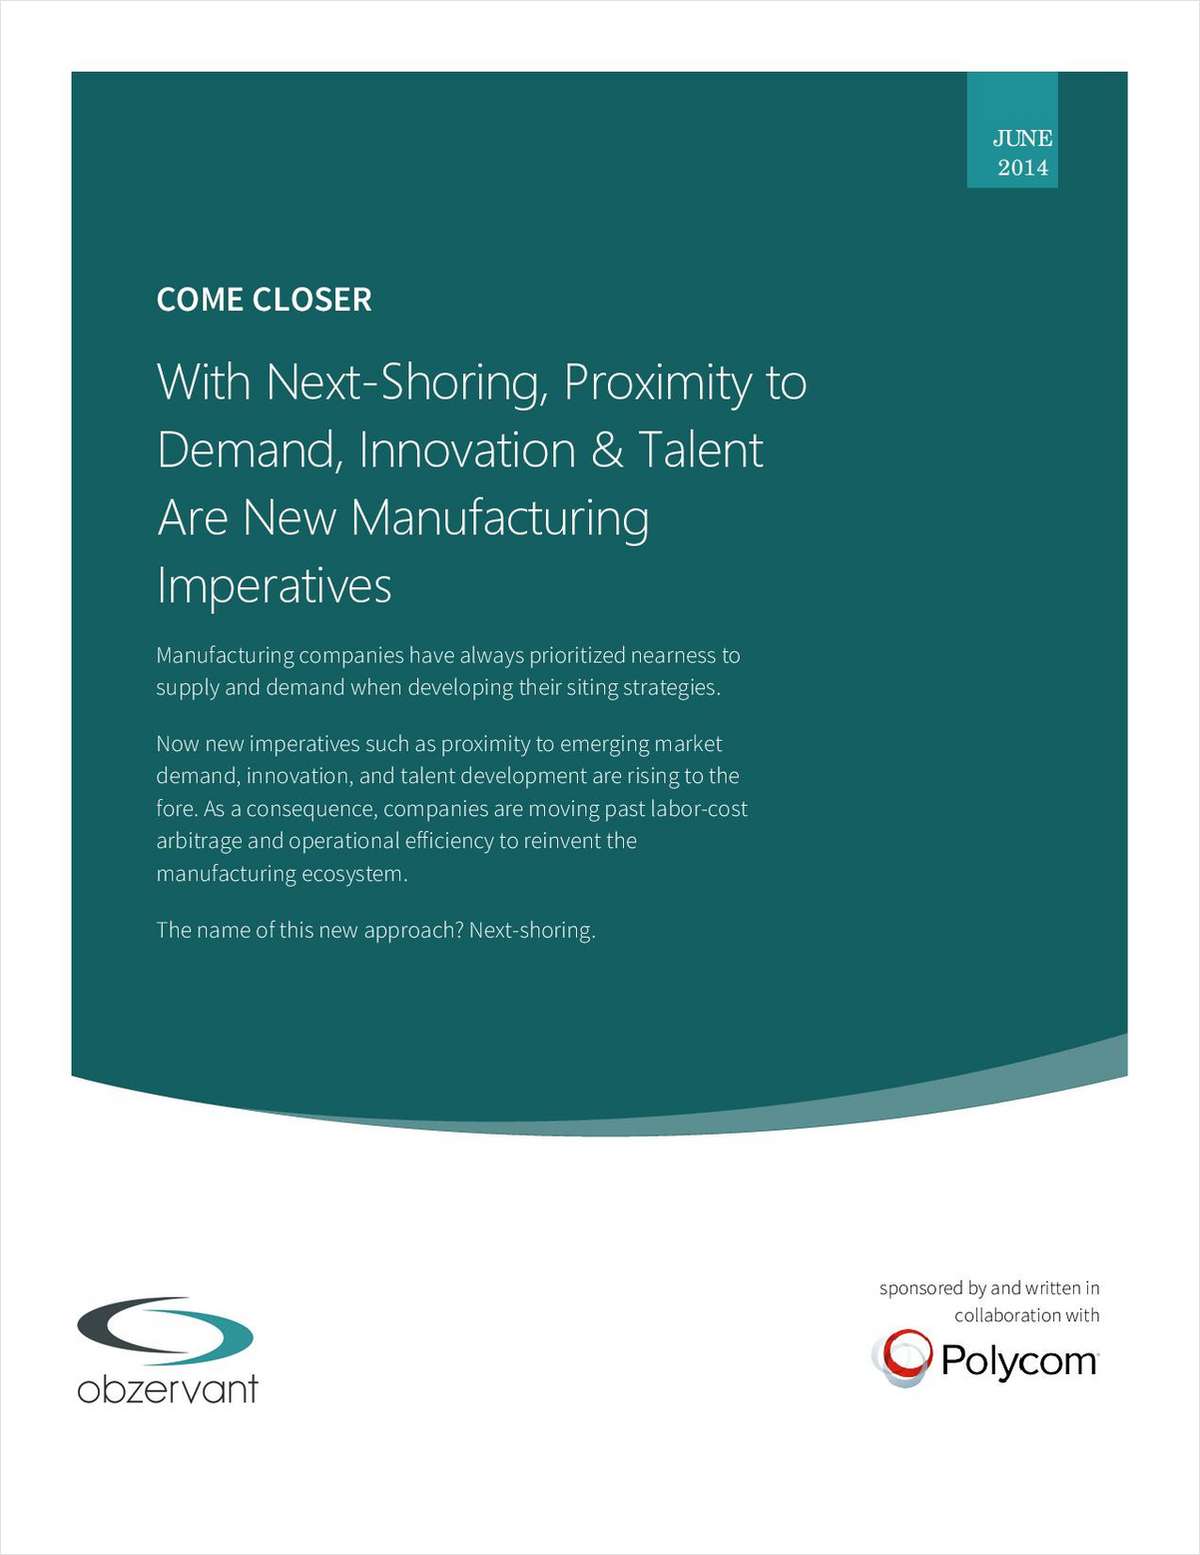 Come Closer: With Next-Shoring, Proximity to Demand, Innovation, and Talent Are New Manufacturing Imperatives